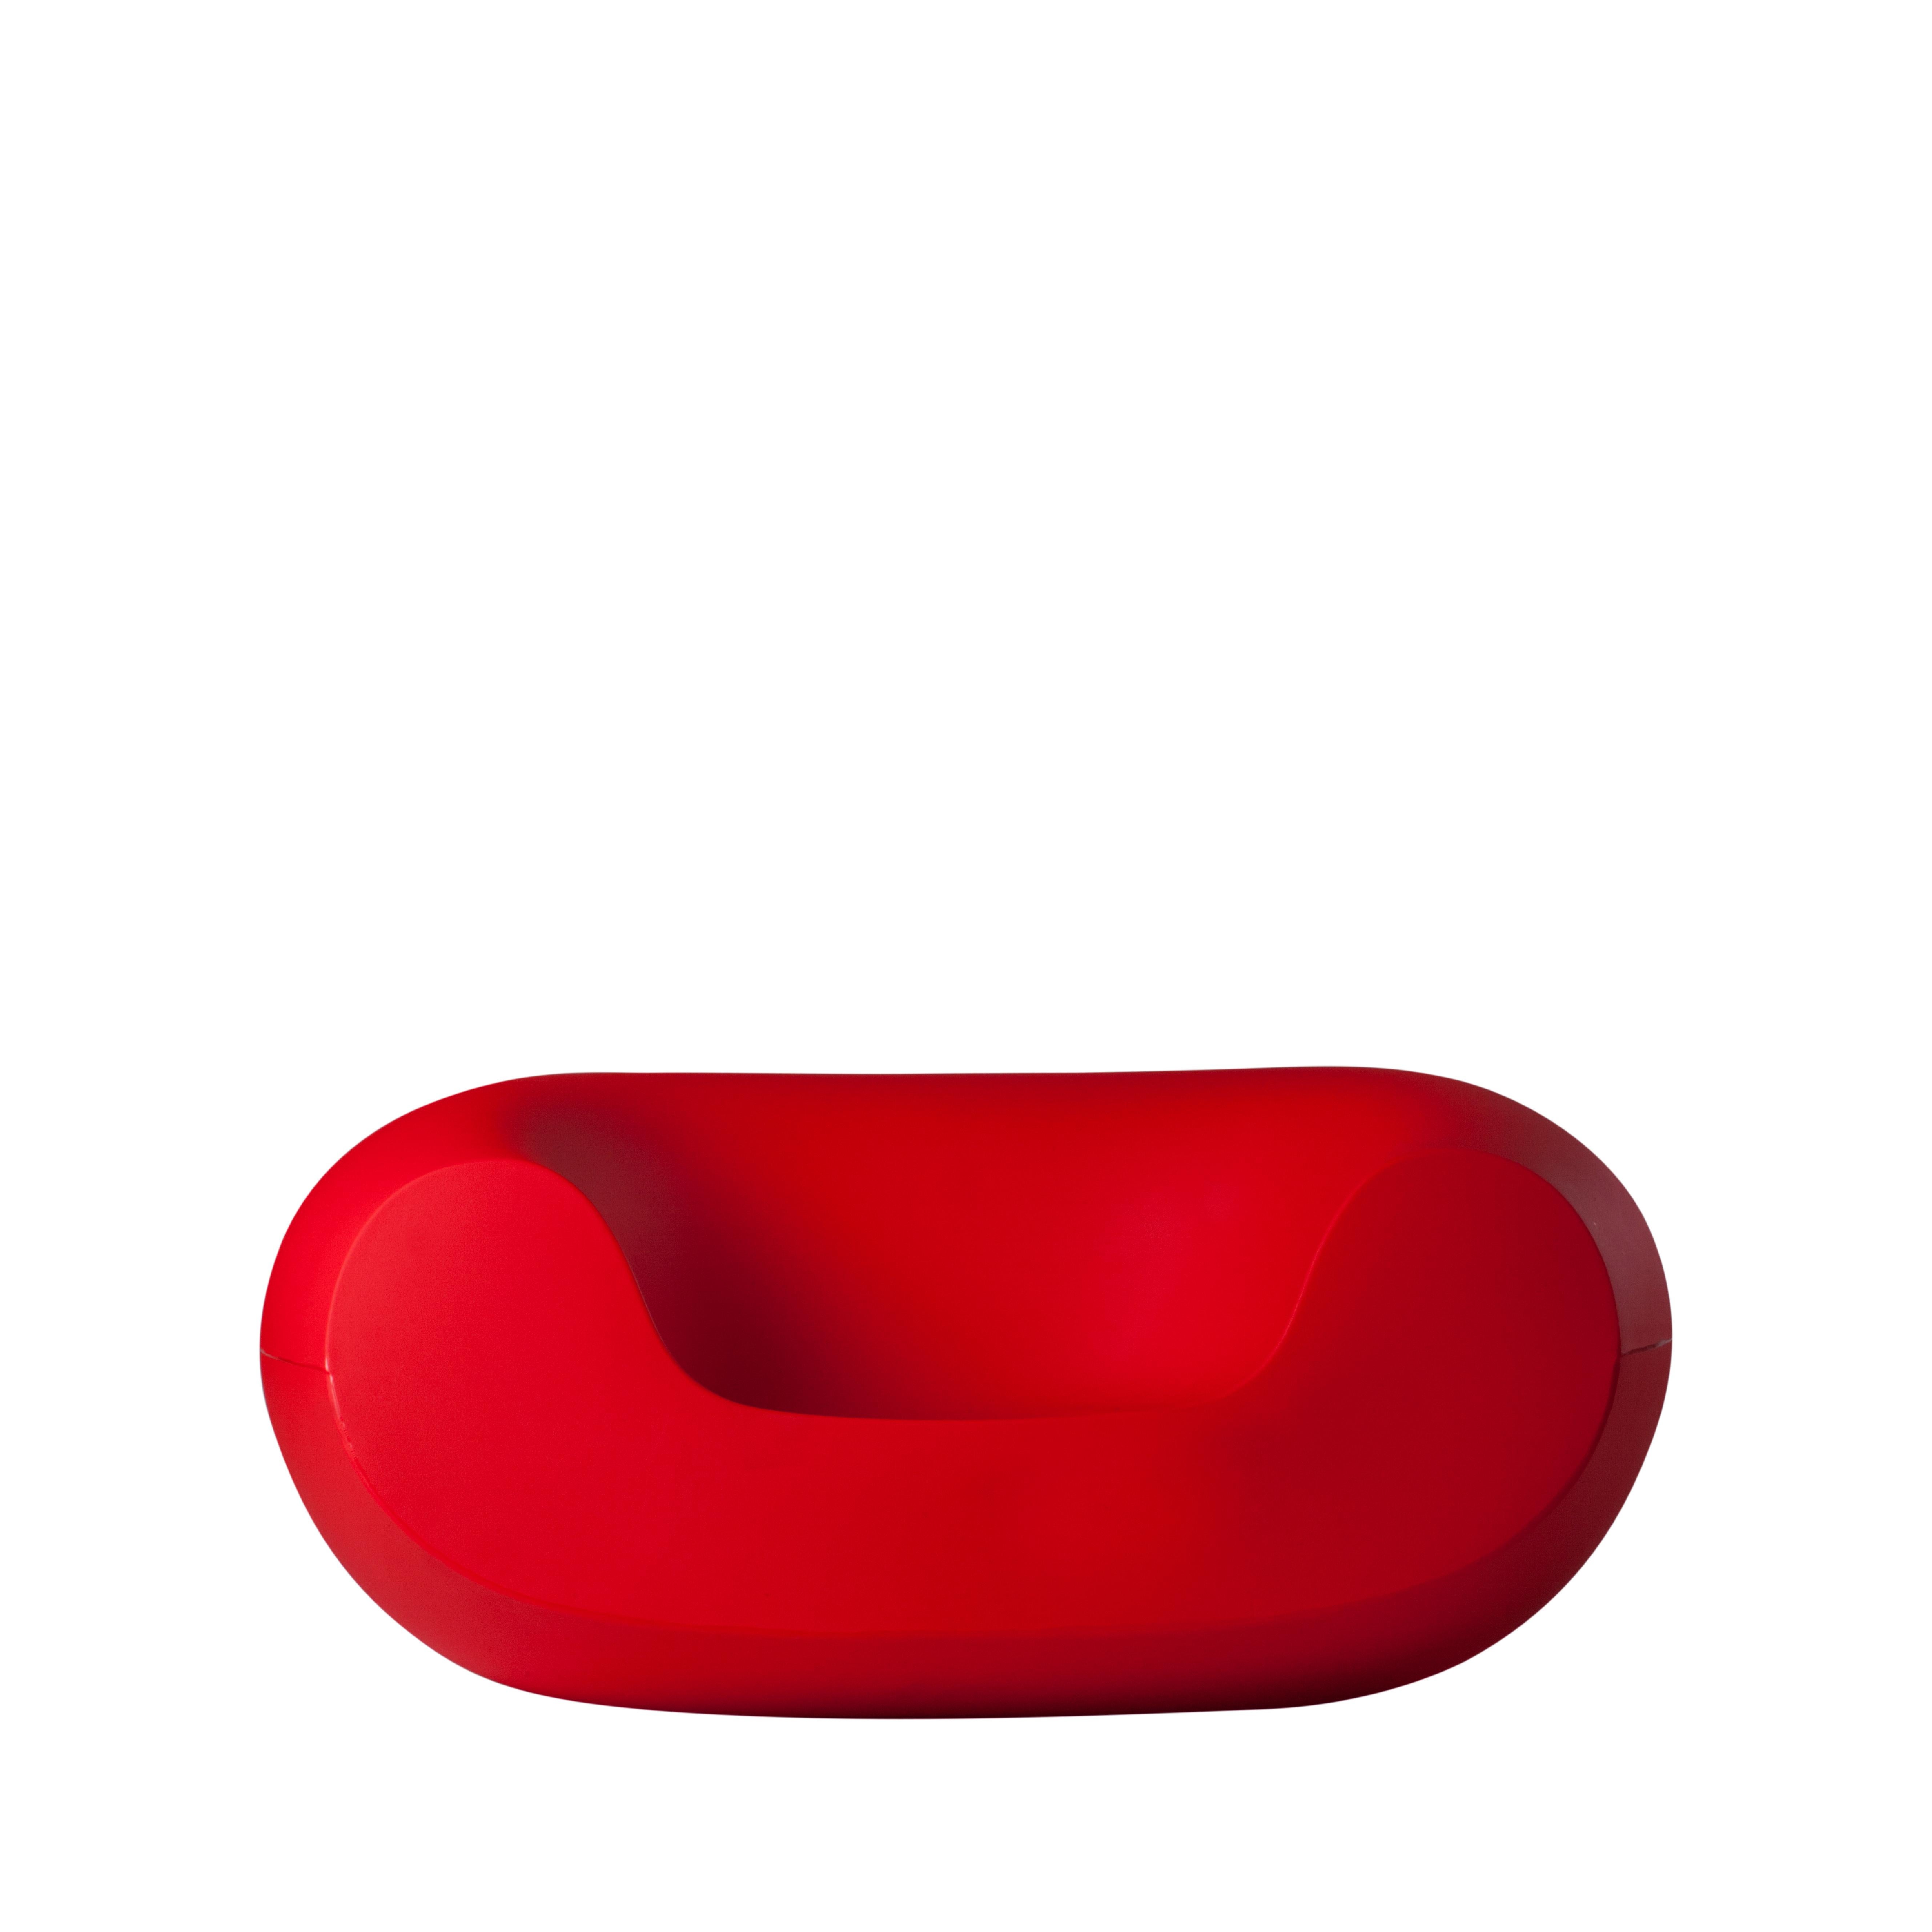 The armchair Chubby, created by the famous designer Marcel Wanders, is one of the best products of the whole Slide production. Chubby is a reinterpretation of Crochet Chair: it has got the same design but it is made in polyethylene, suitable for